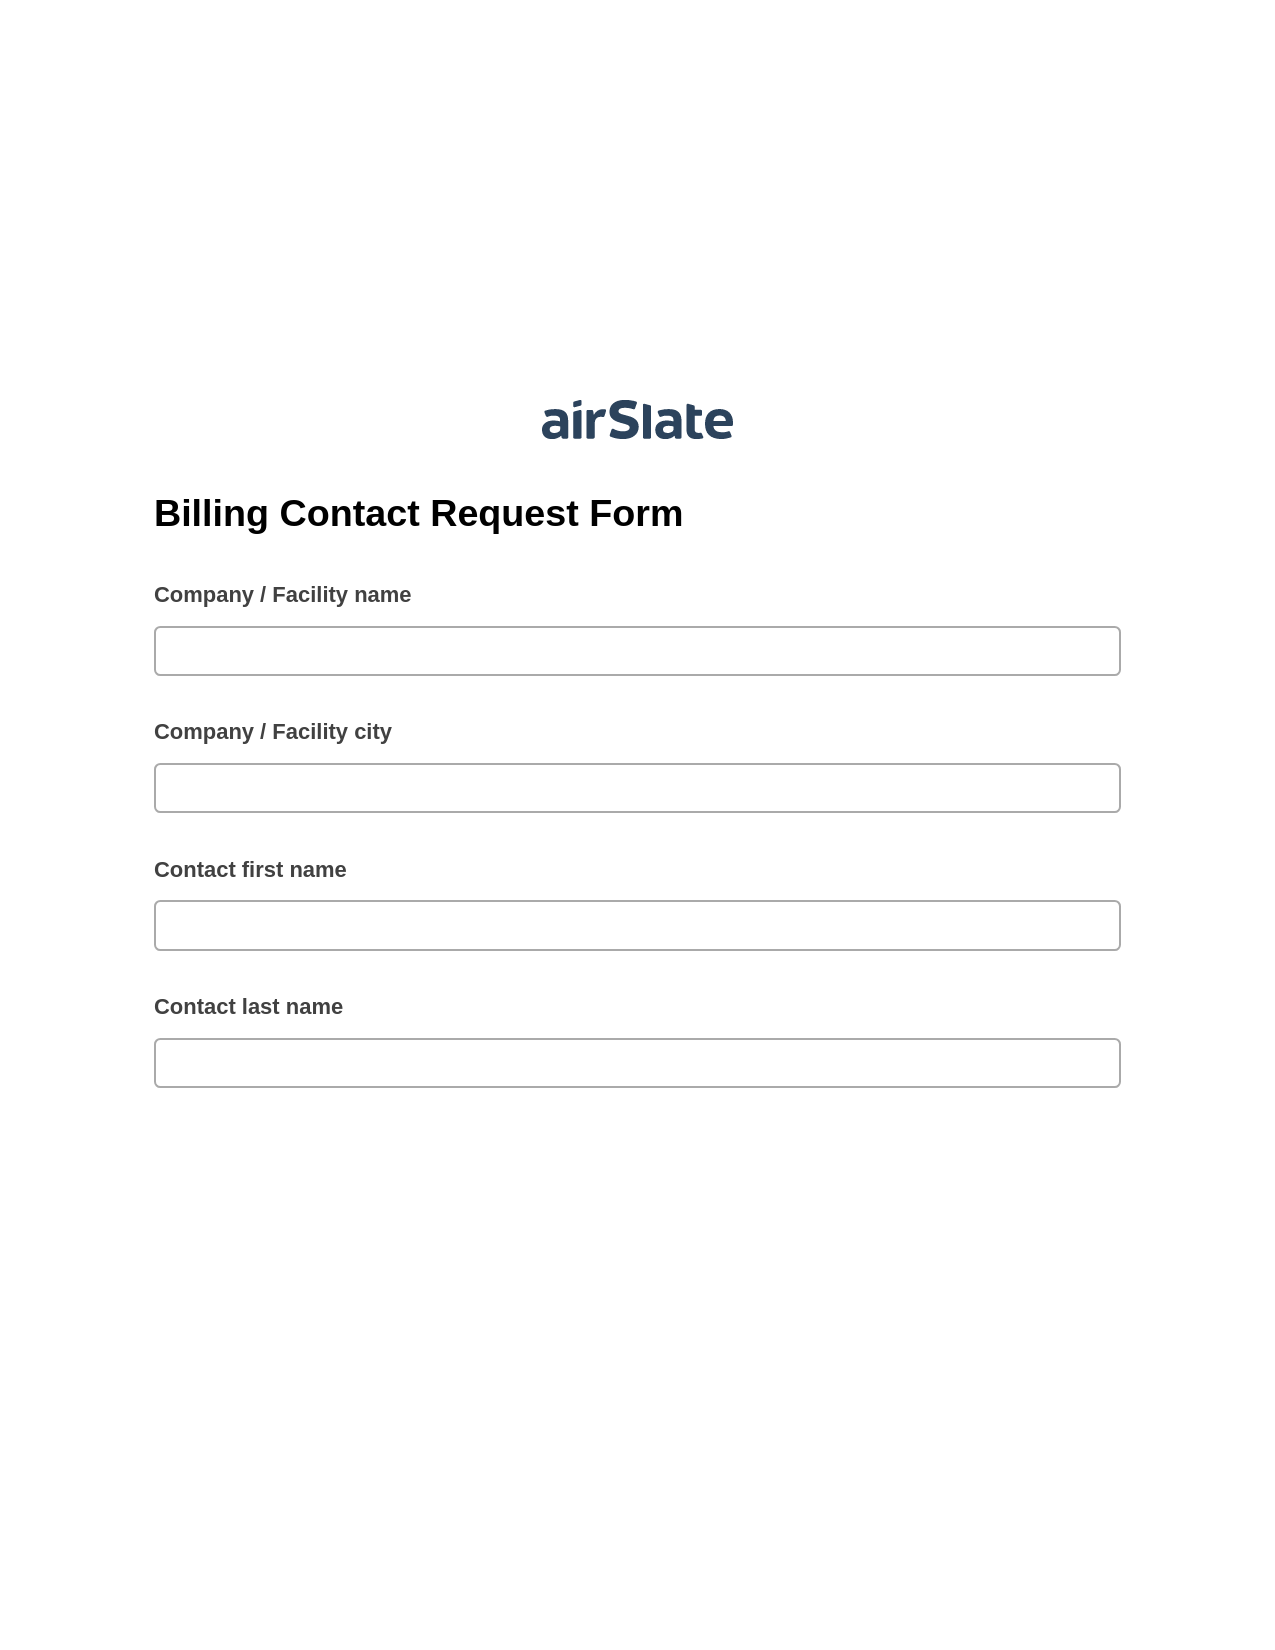 Billing Contact Request Form Pre-fill from Excel Spreadsheet Bot, Update MS Dynamics 365 Records Bot, Box Bot